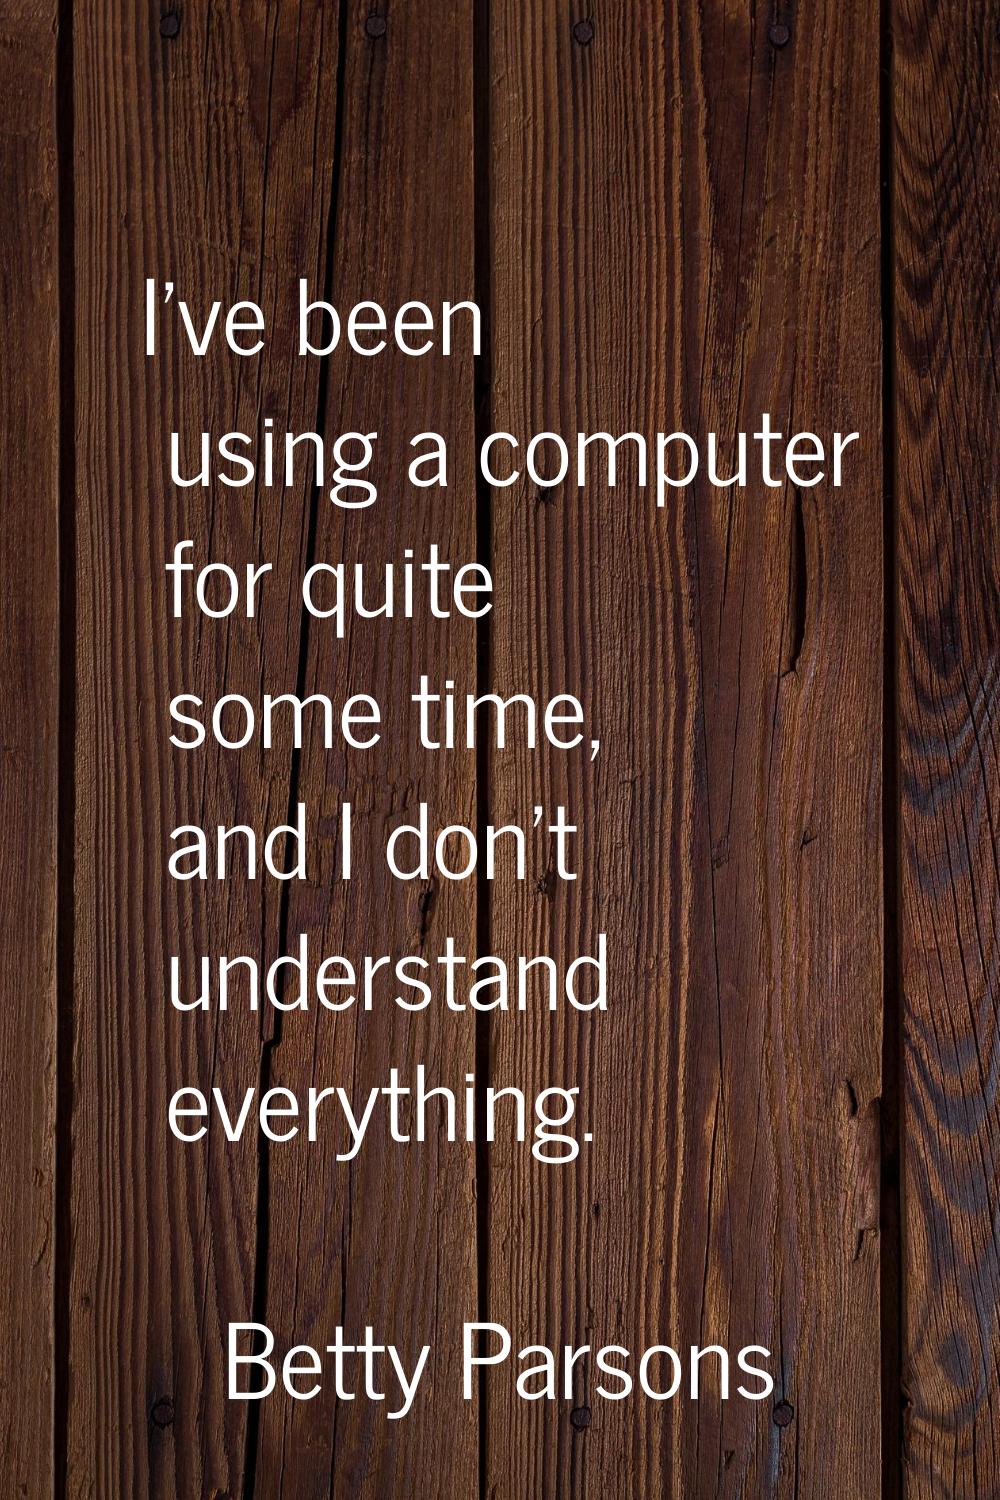 I've been using a computer for quite some time, and I don't understand everything.